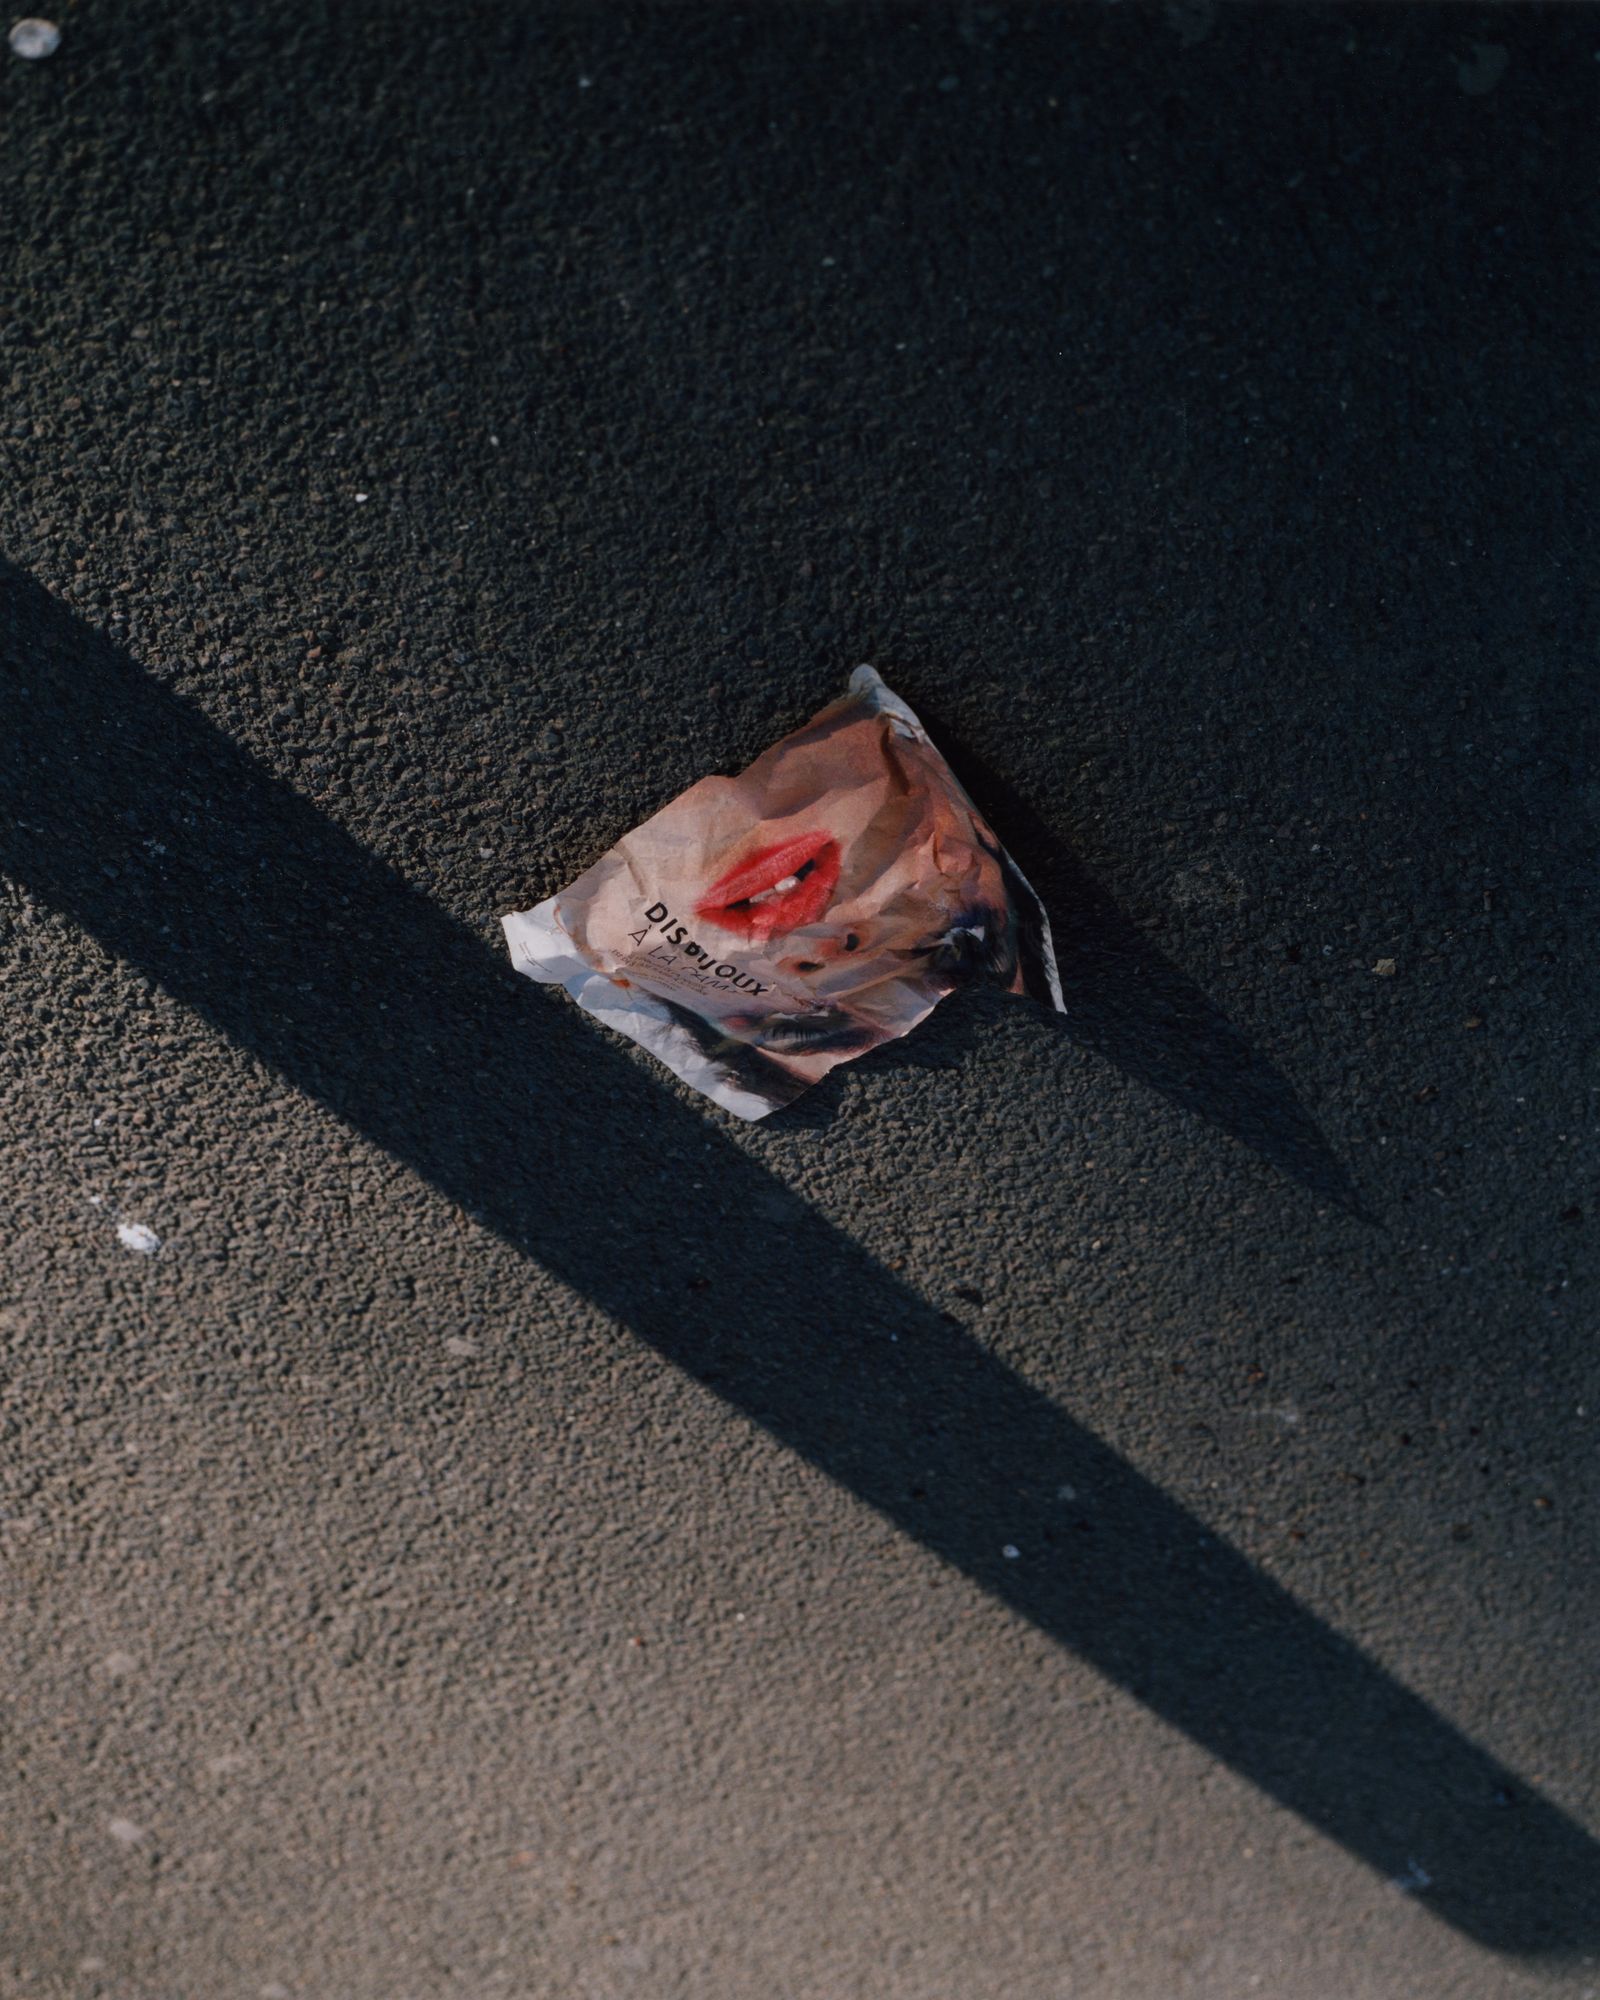 © Alexandre Silberman - Torn page « Say Jewel to the lady » // Saint-Denis // February 2020